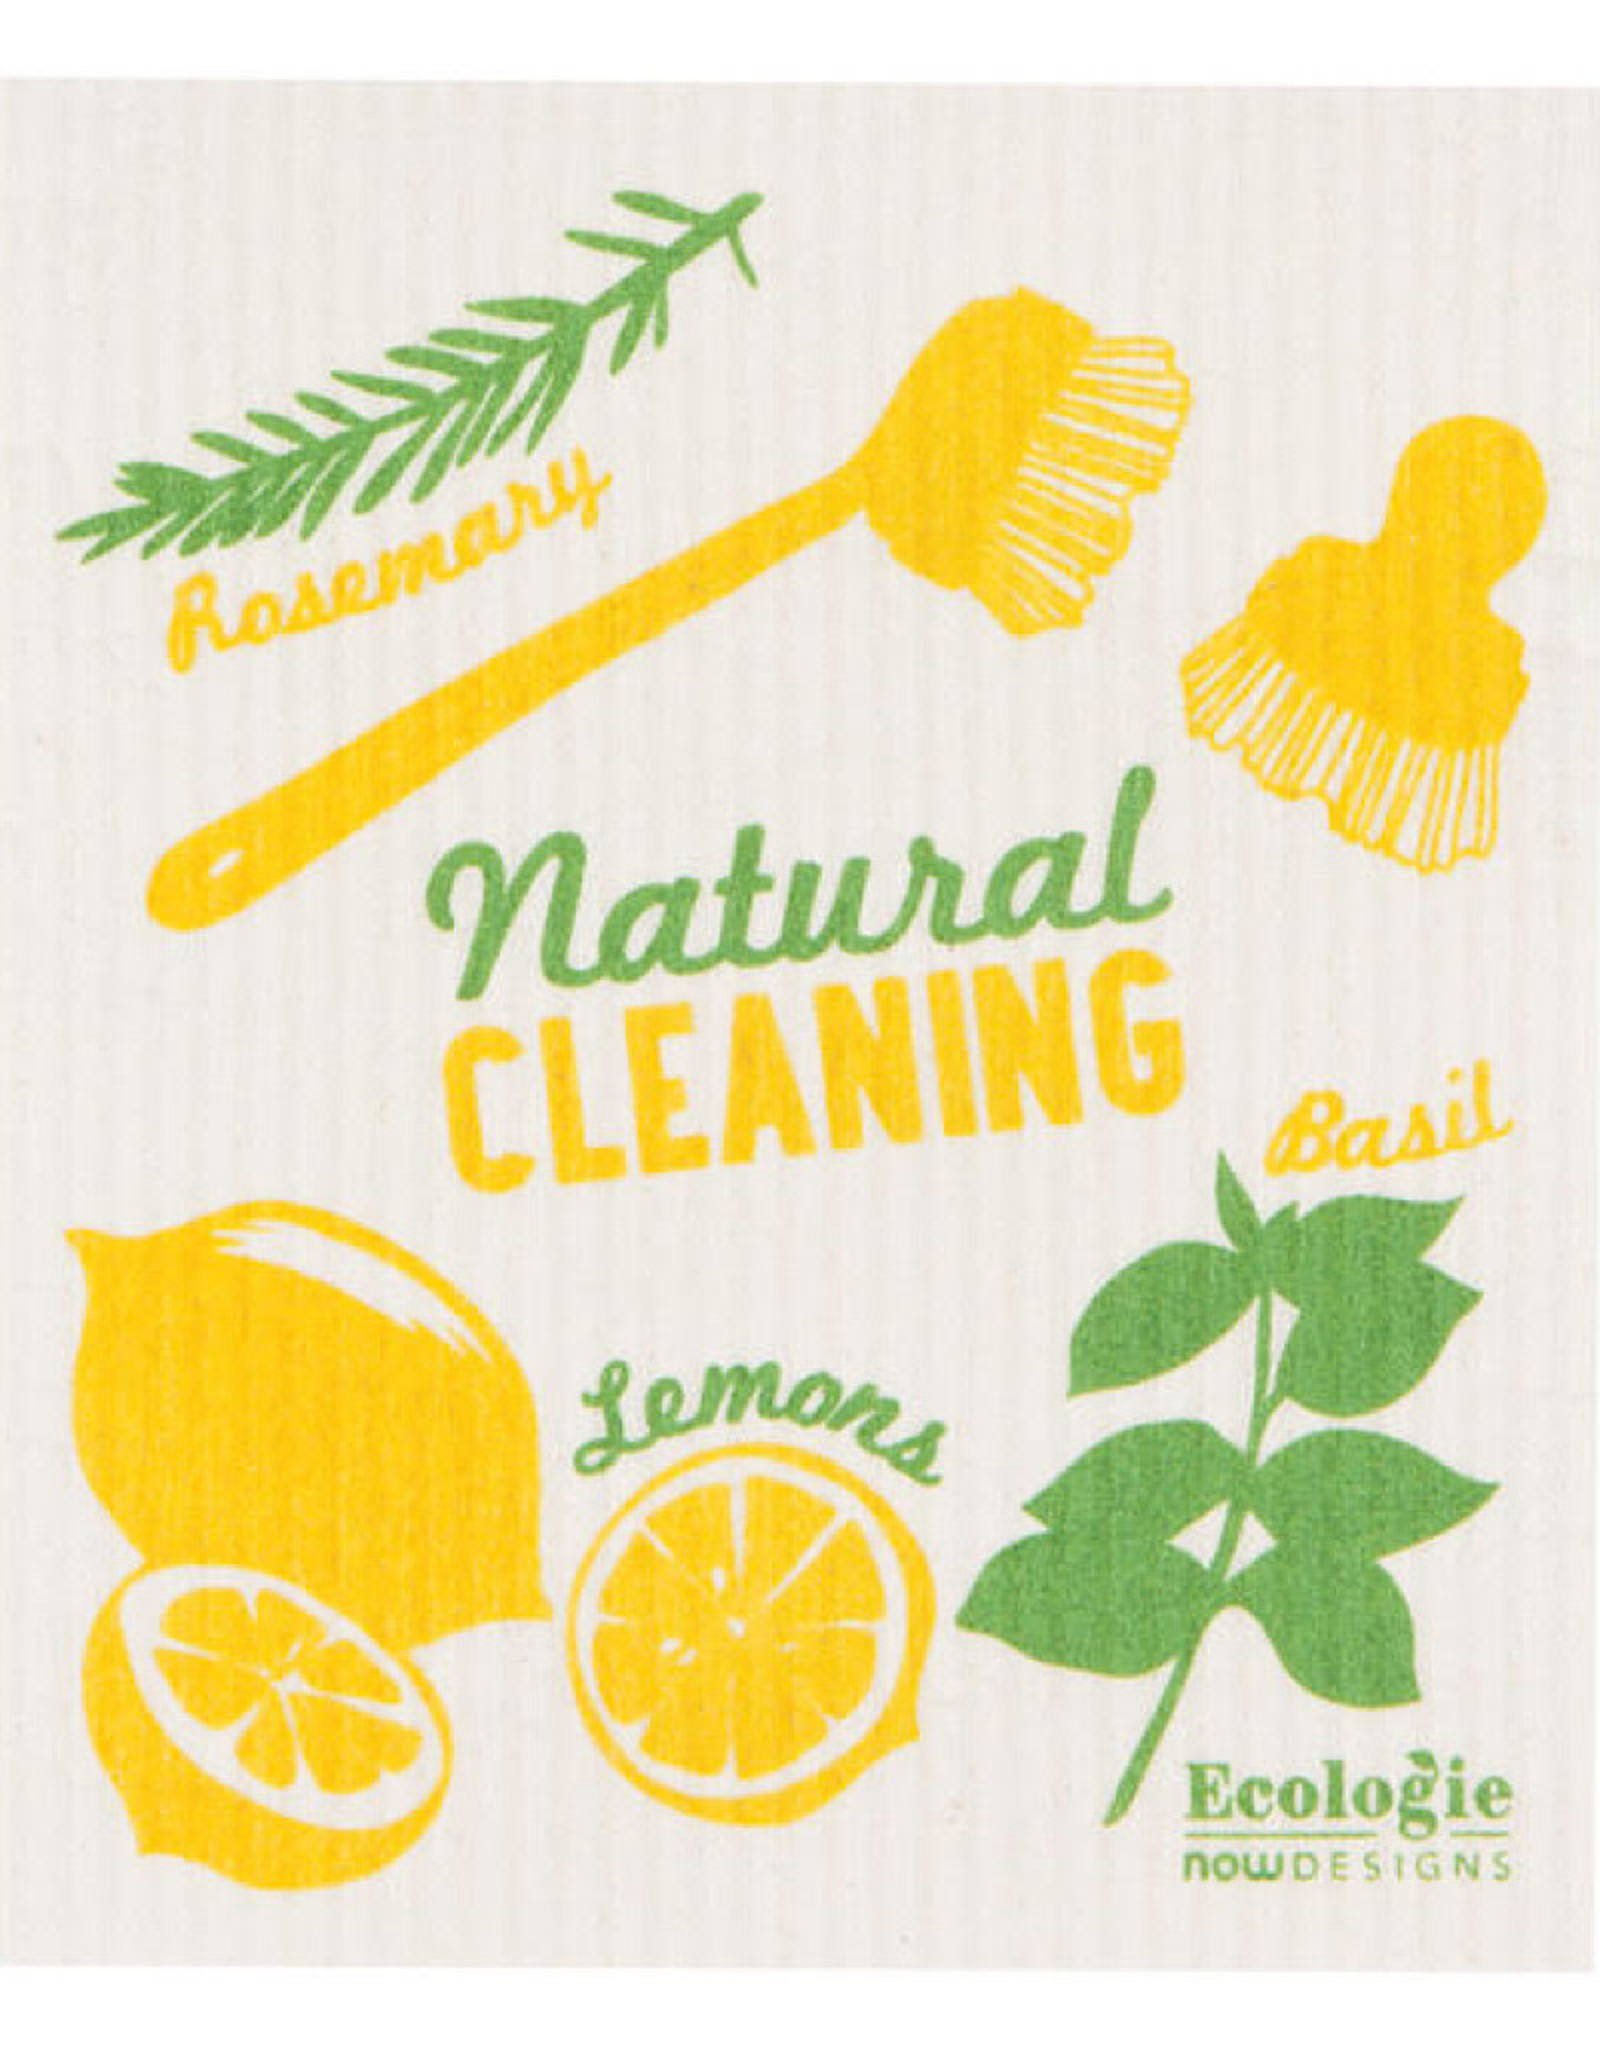 Now Designs Swedish Dishcloth click to see more Natural Cleaning